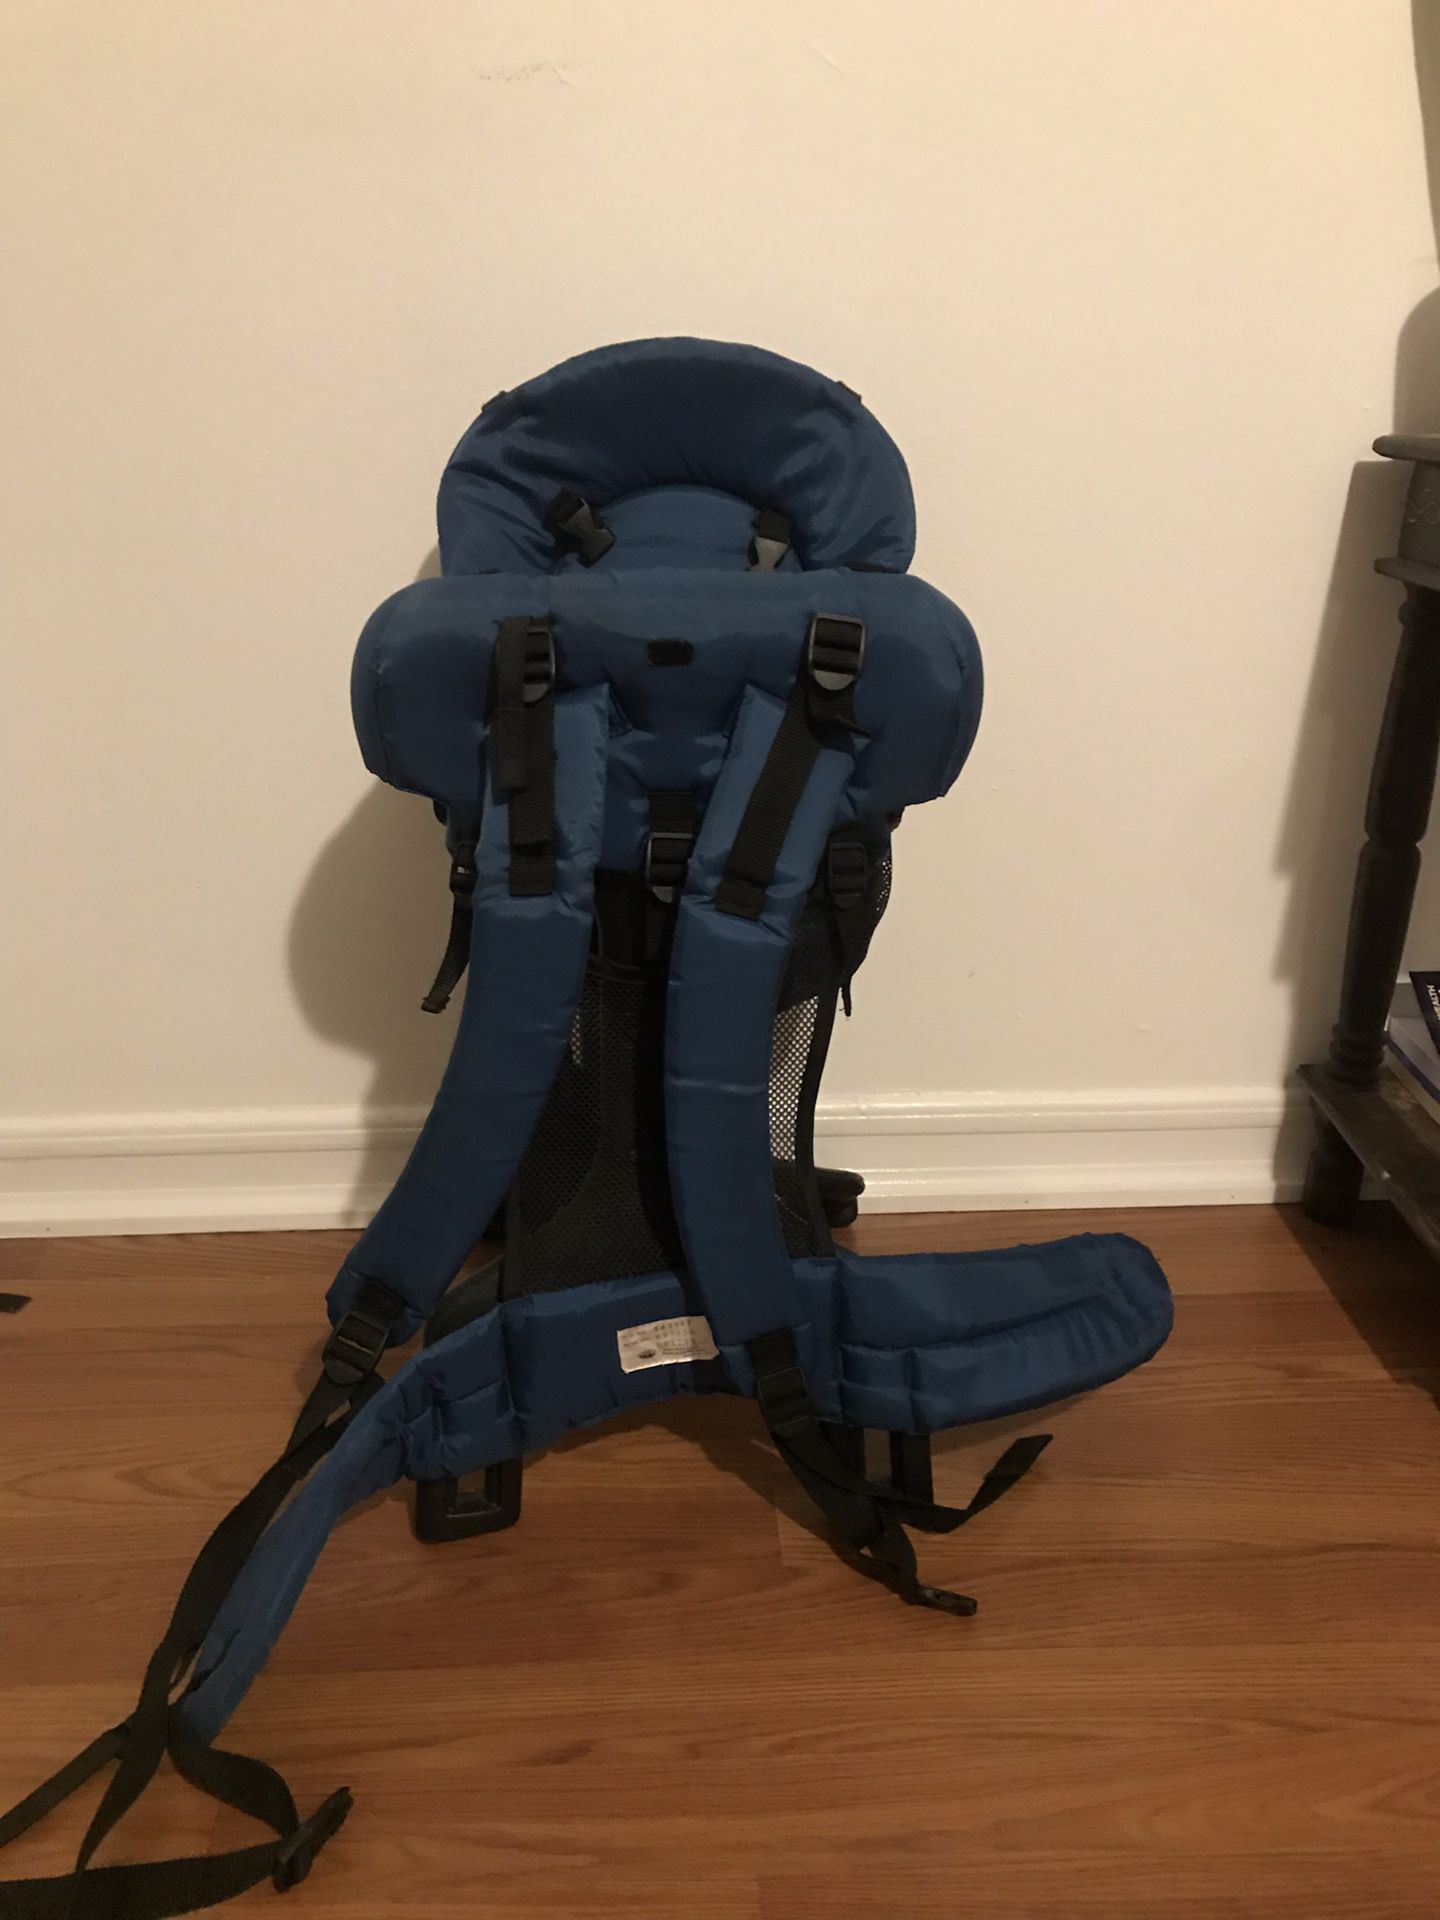 Hiking backpack to carry baby